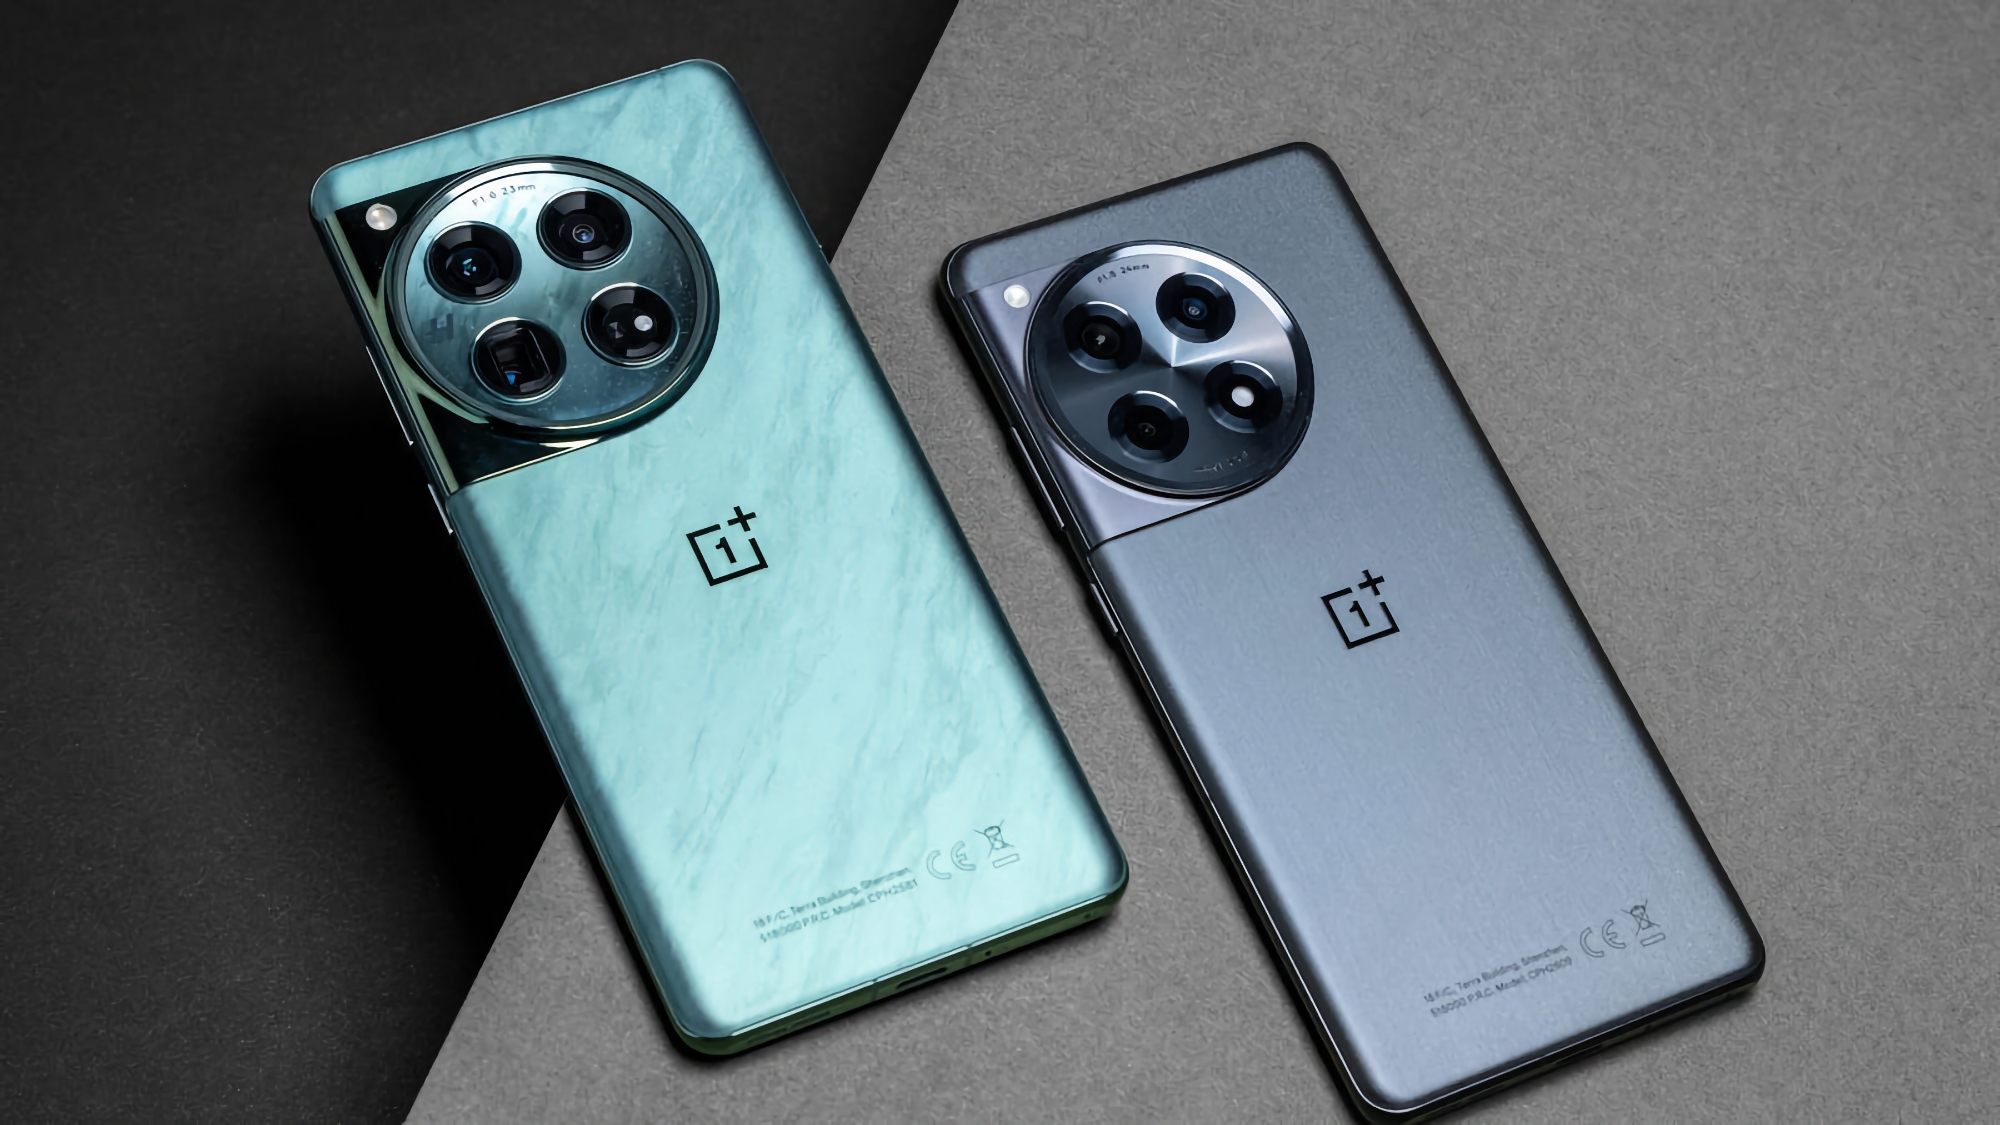 An insider has revealed what the cameras of the OnePlus 13 and OnePlus 13R smartphones might look like